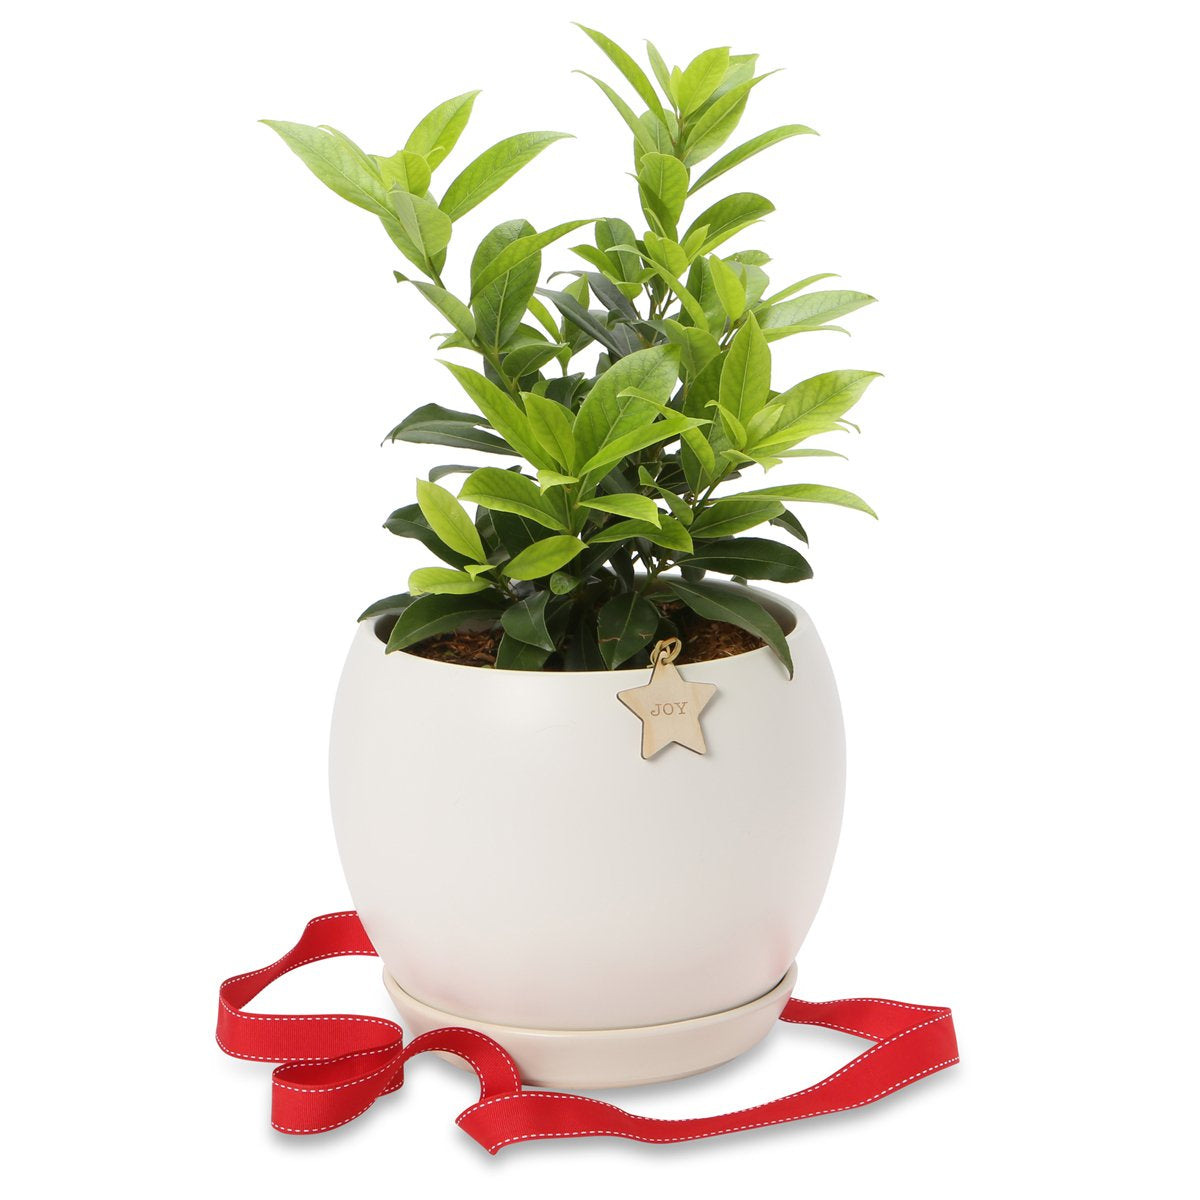 Potted Christmas Bay laurel trees